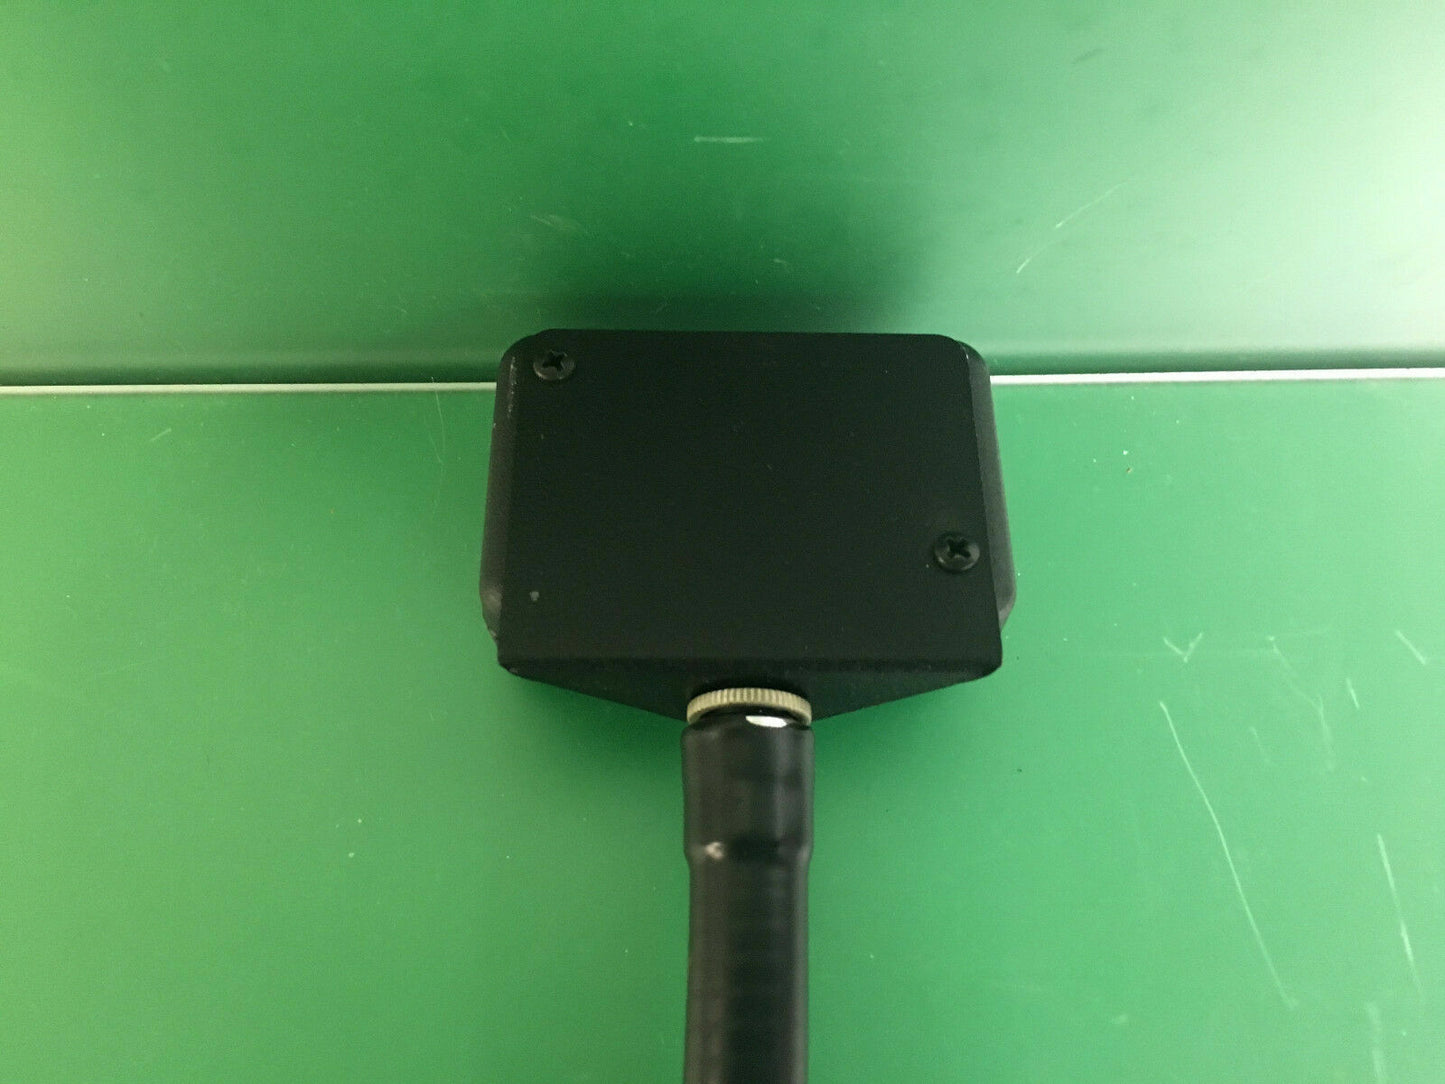 Seat Function Display  for Power Wheelchair  #8912